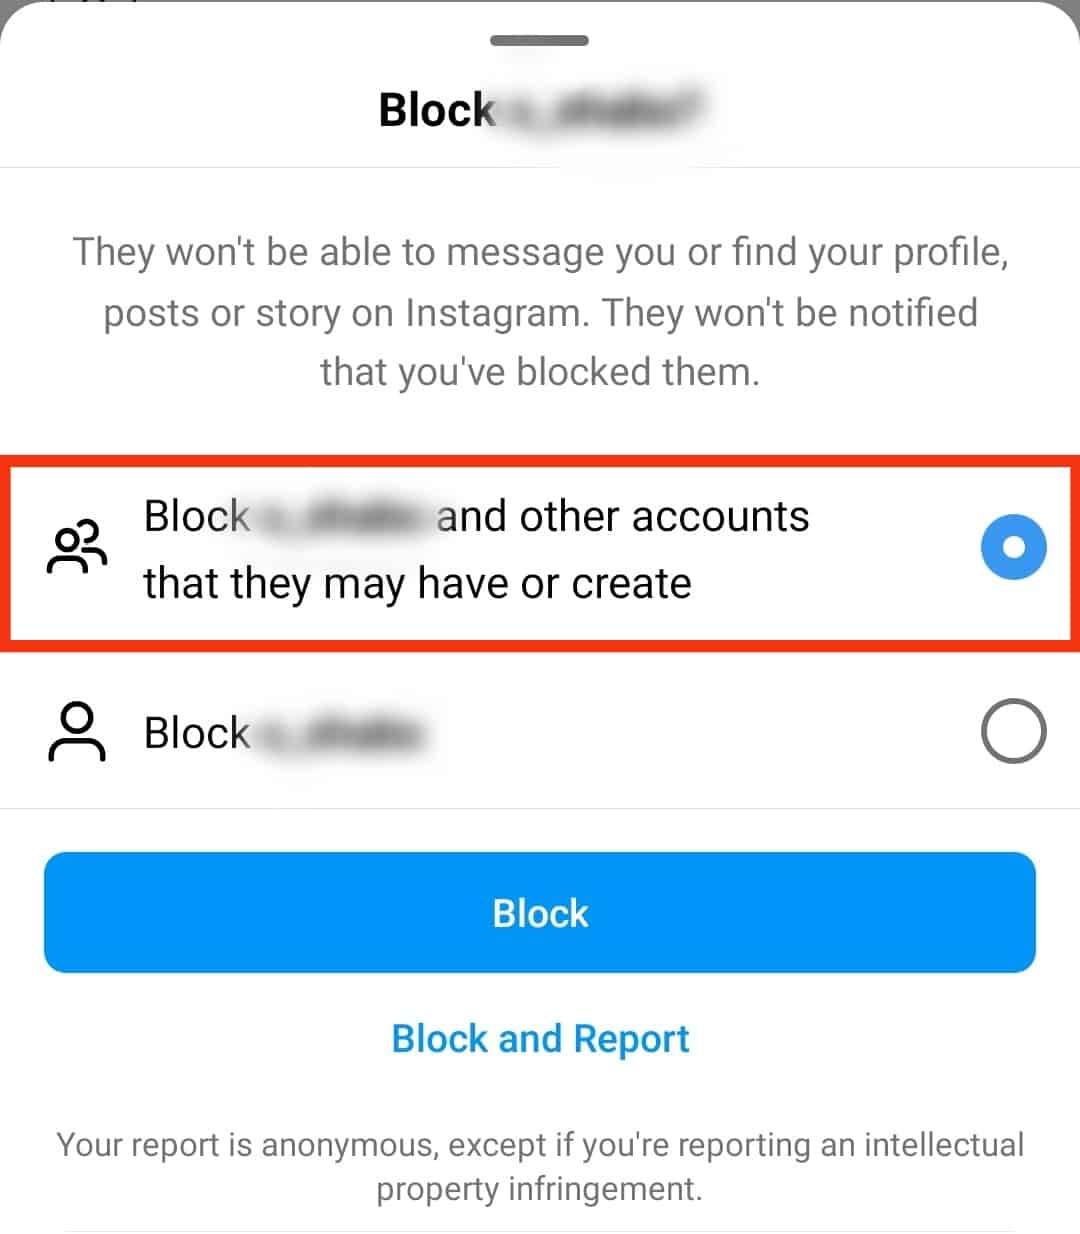 Select The Option To Block The Given Accounts